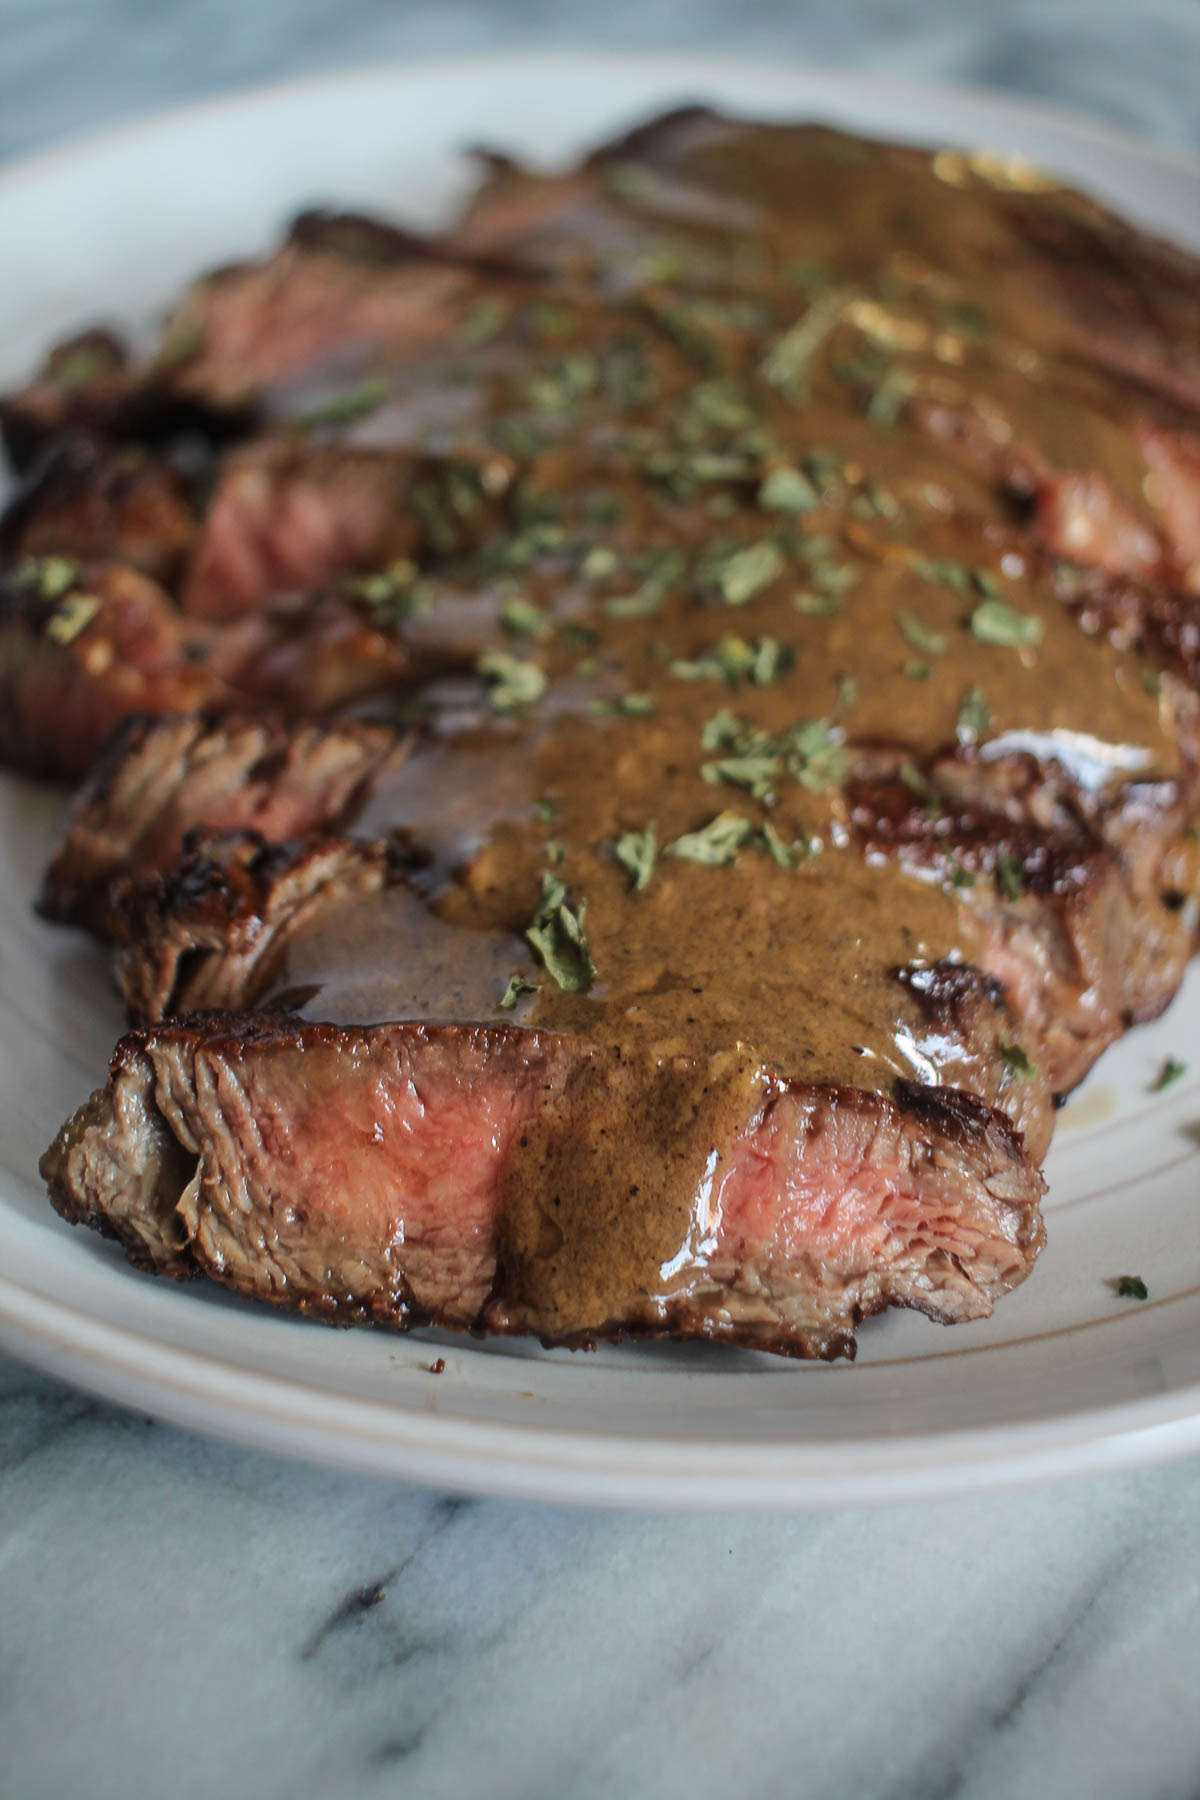 Steak with Bourbon Cream Sauce | Ribeye Steak with Bourbon Cream Sauce is the ideal special occasion recipe. It feels fancy without being fussy or requiring too many ingredients. #steak 